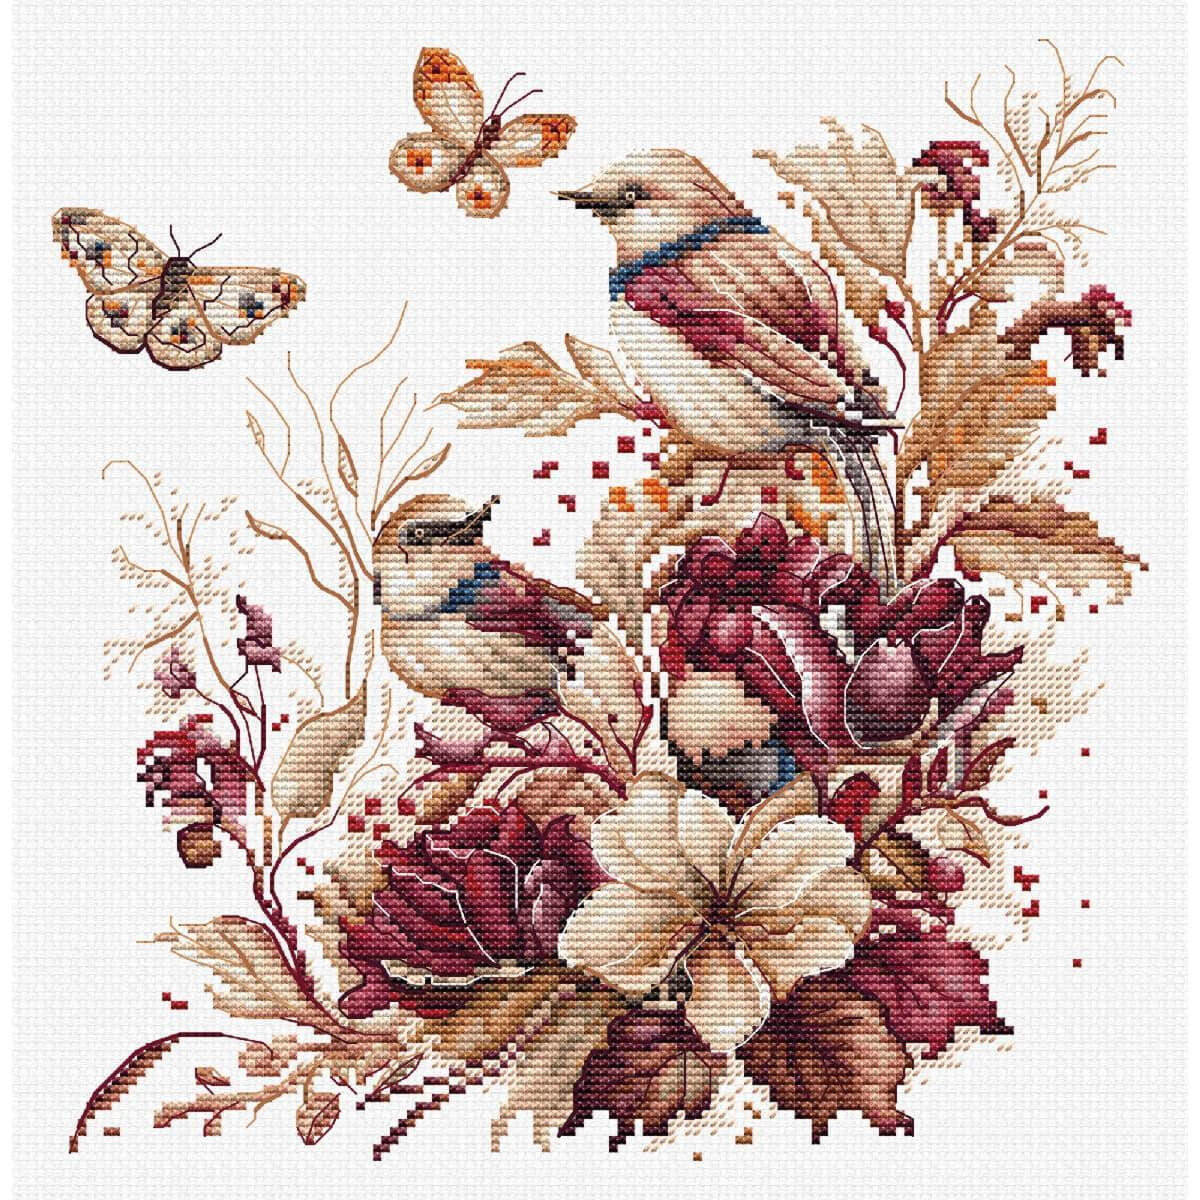 Luca-S counted cross stitch kit "The...